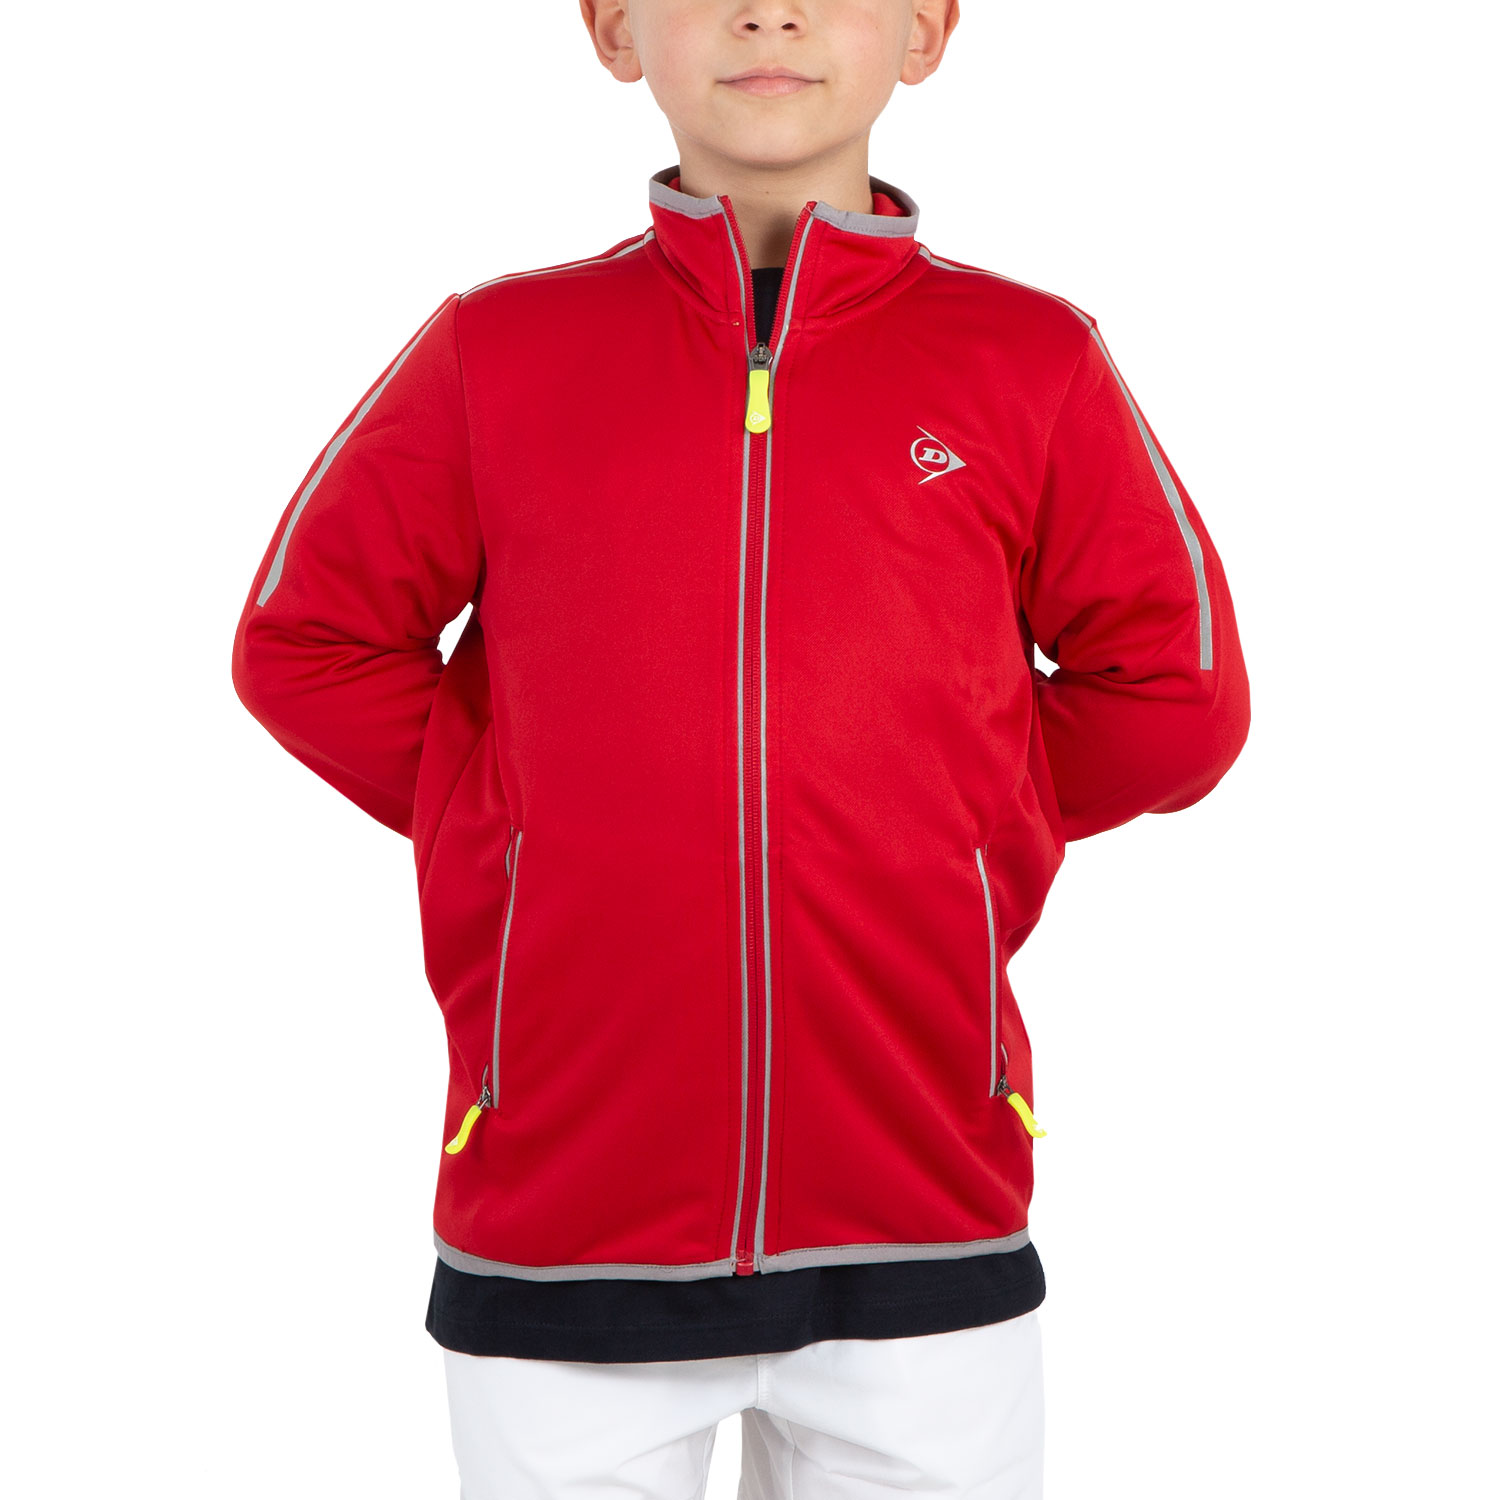 Dunlop Club Knitted Jacket Boy - Red/Silver